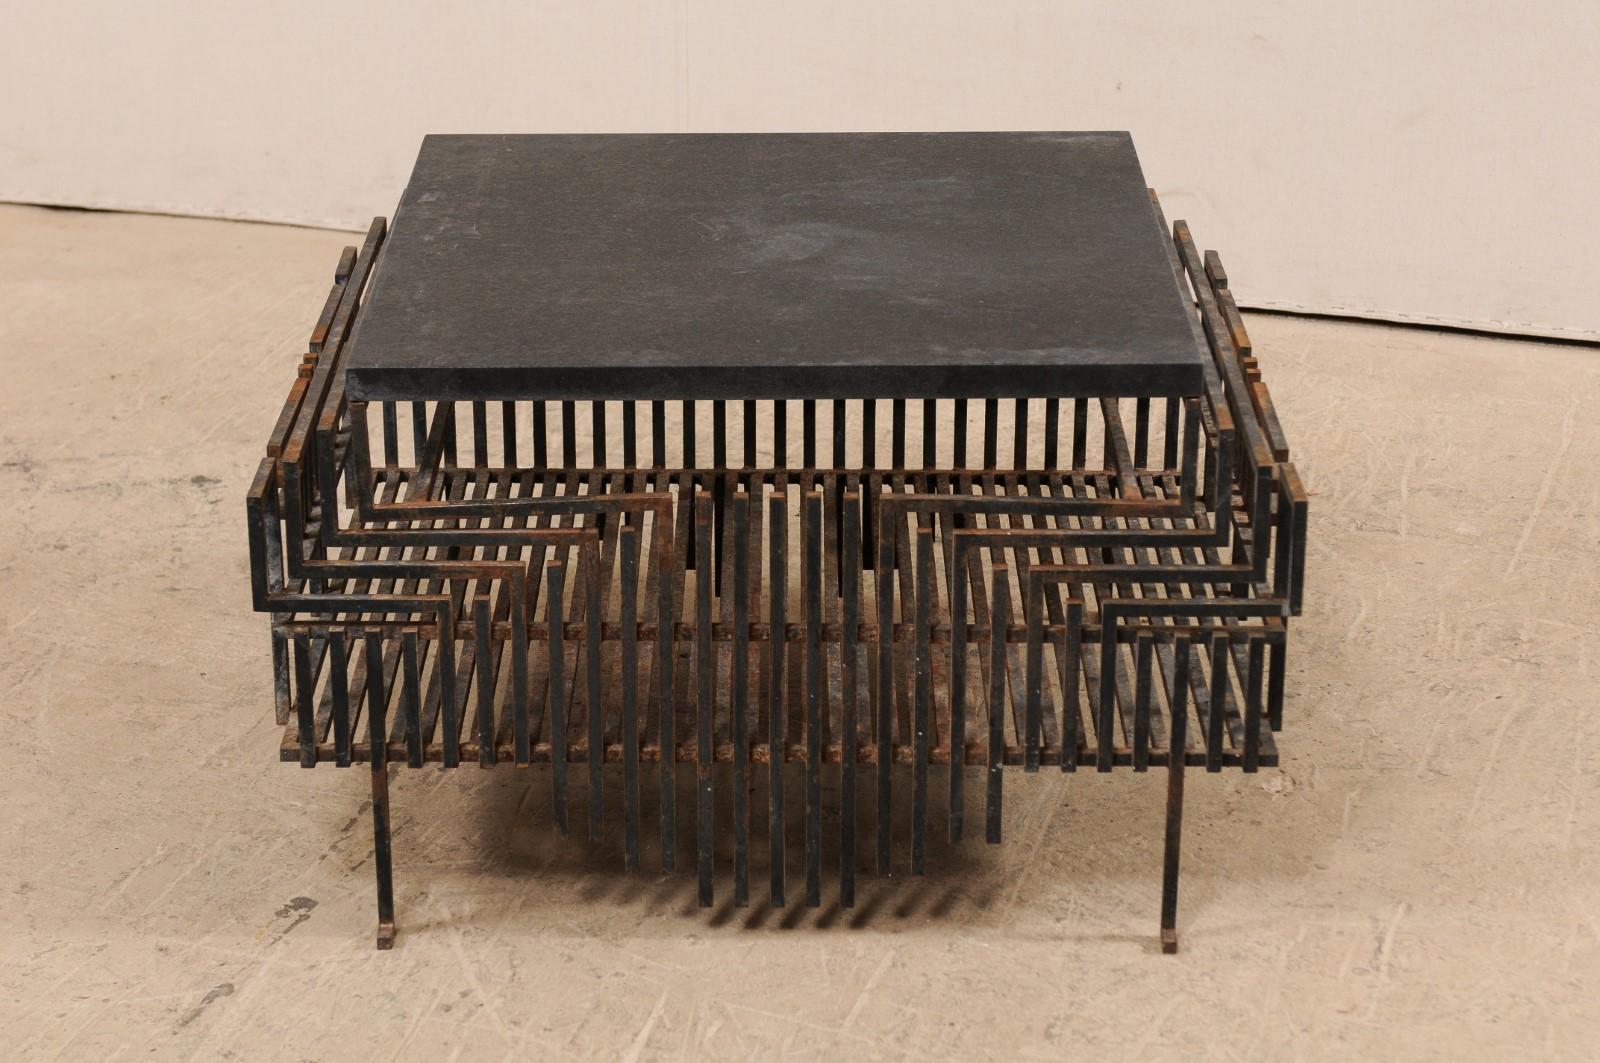 French, Early 20th Century Iron Fireplace Grate Coffee Table with Granite Top 4